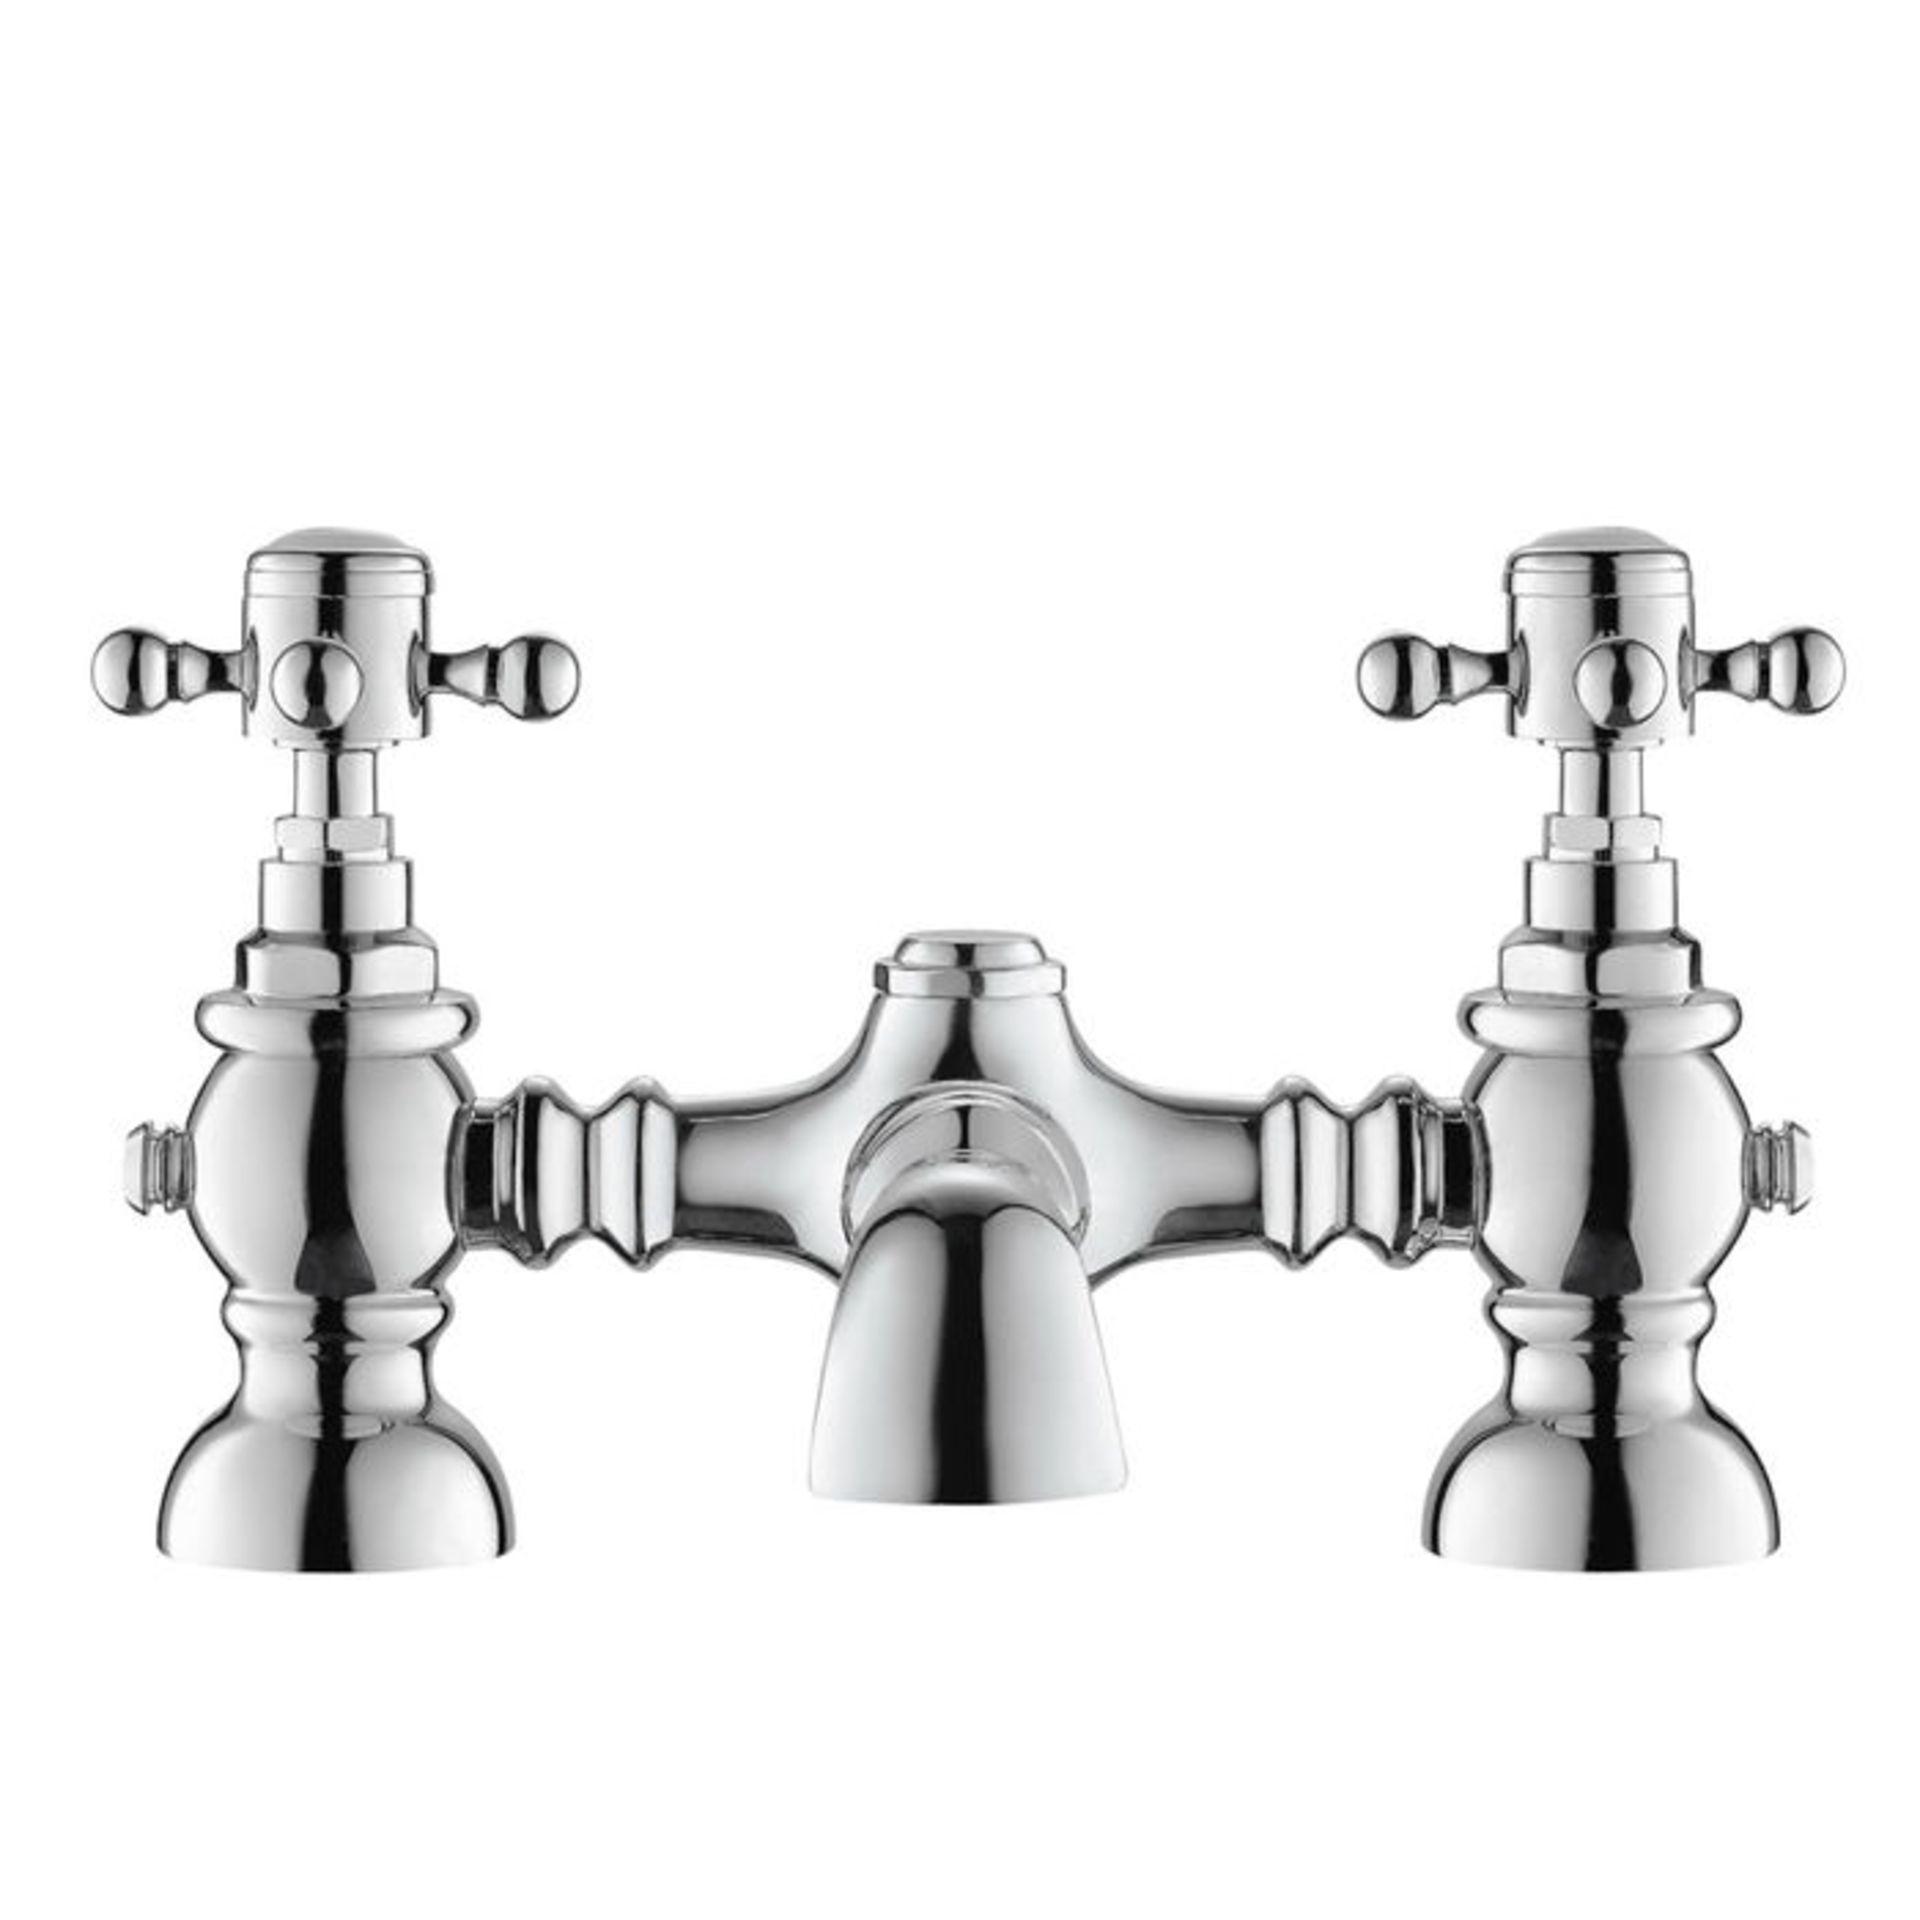 (TS75) Cambridge Traditional Bath Mixer Tap Chrome Plated Solid Brass Traditional design Minimum 0.5 - Image 4 of 4